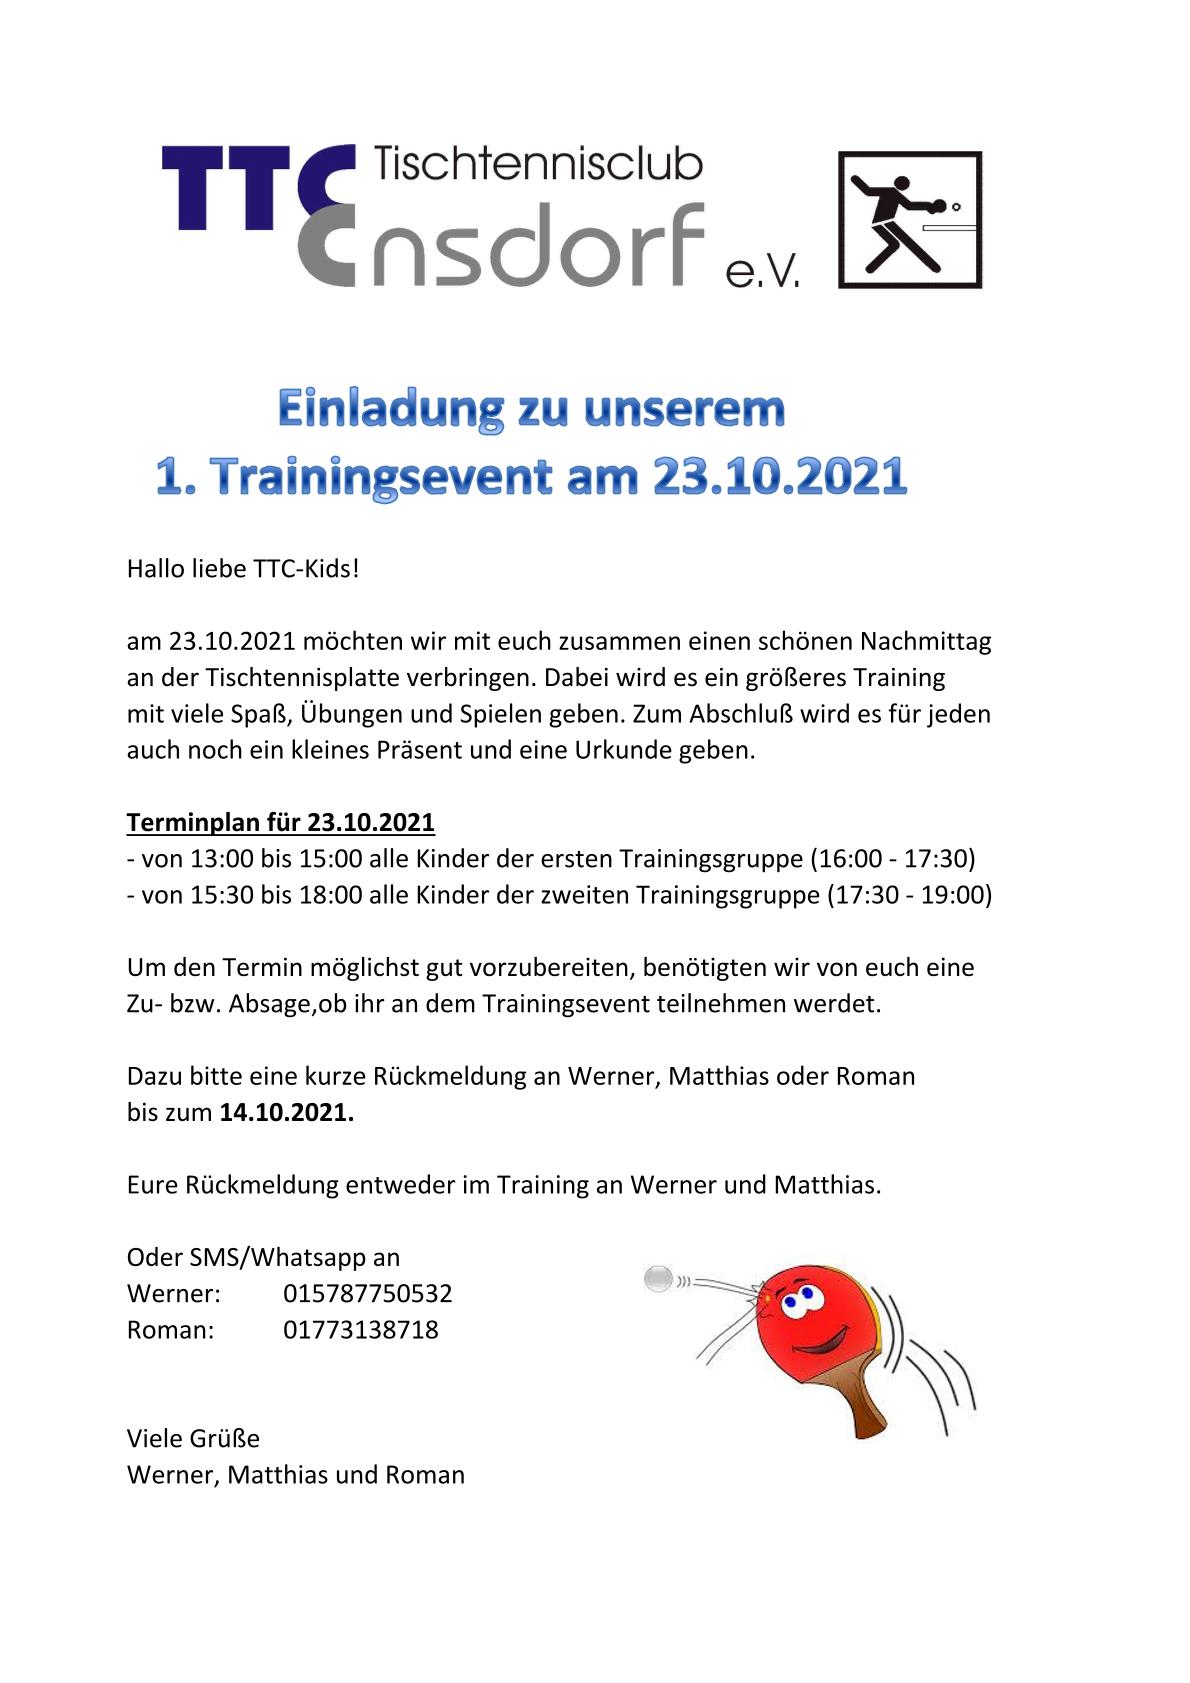 You are currently viewing 1. Trainingsevent am 23.10.2021